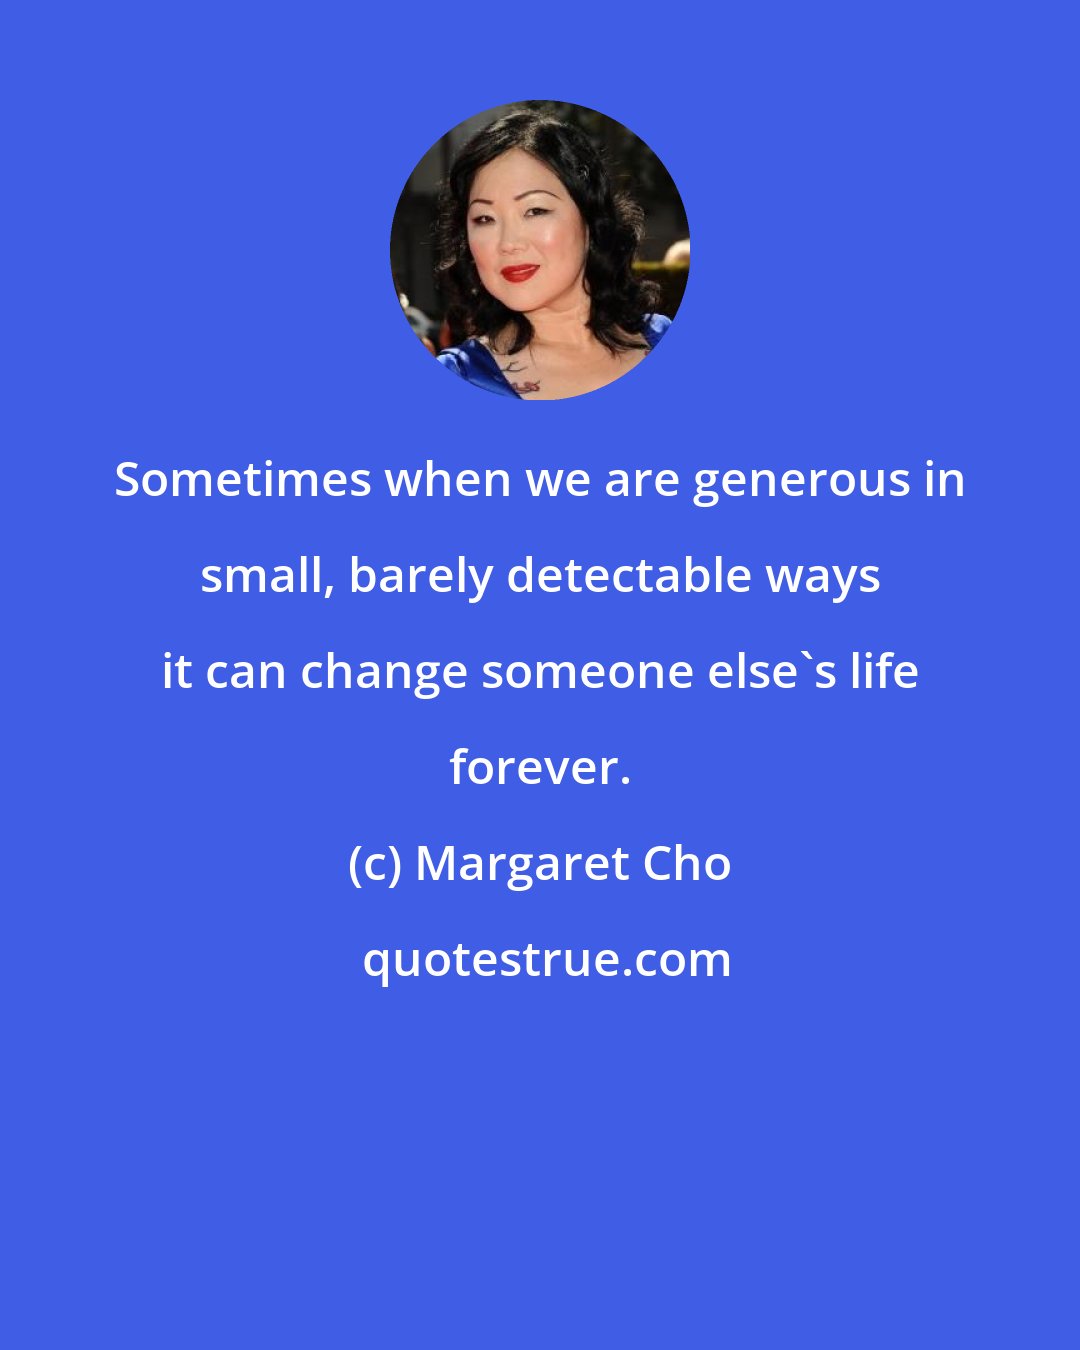 Margaret Cho: Sometimes when we are generous in small, barely detectable ways it can change someone else's life forever.